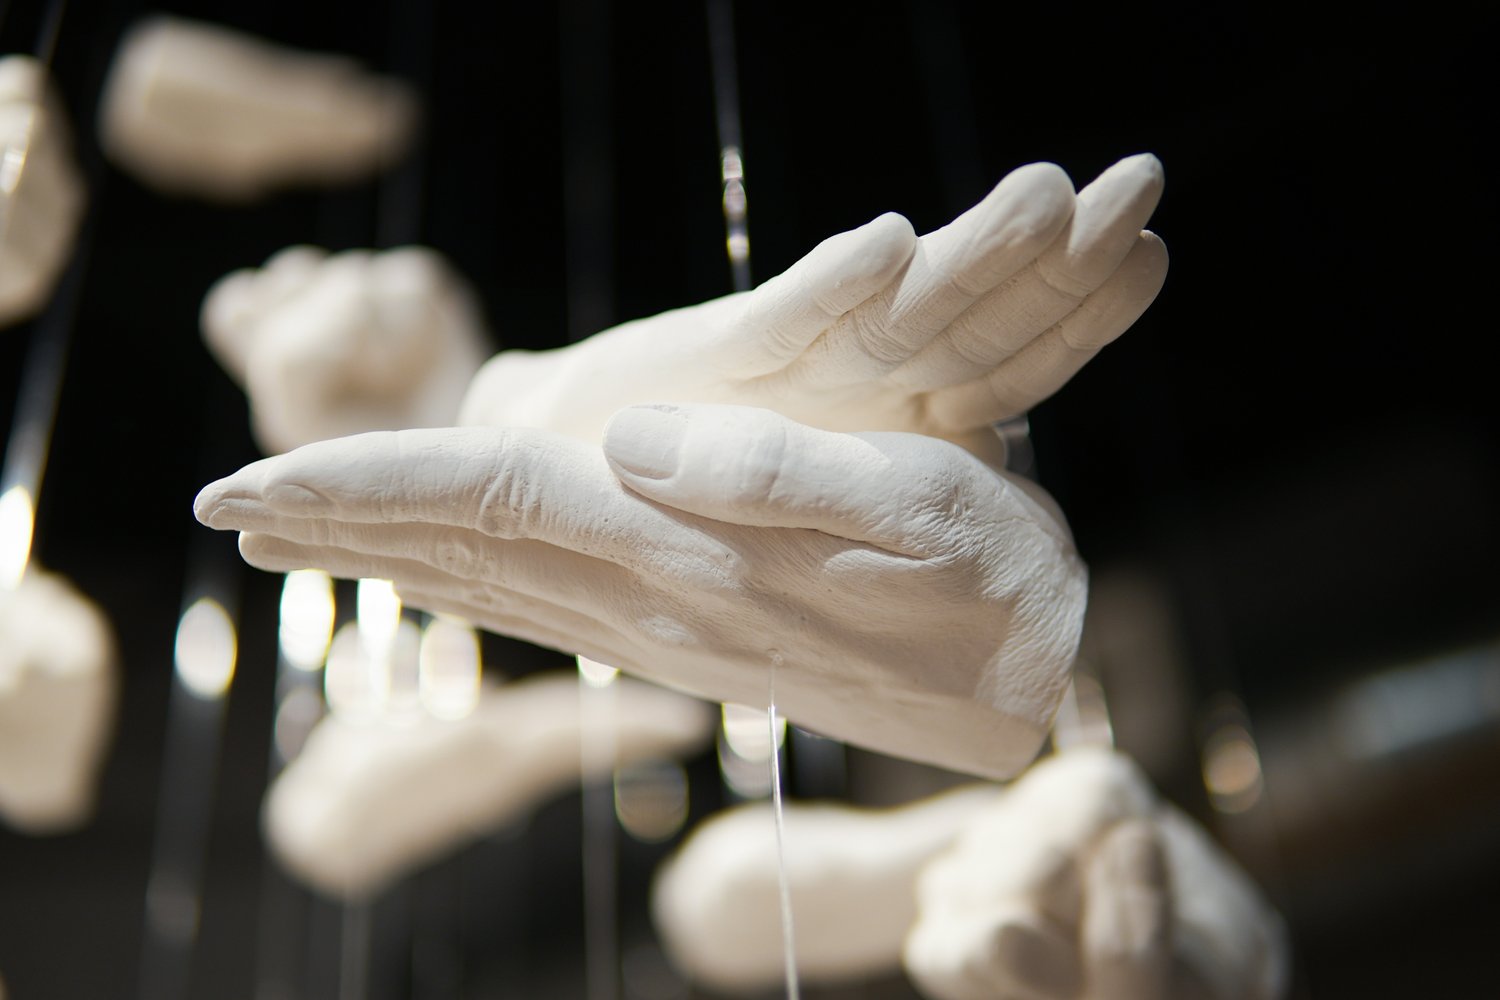 A collection of white hands suspended on a string.